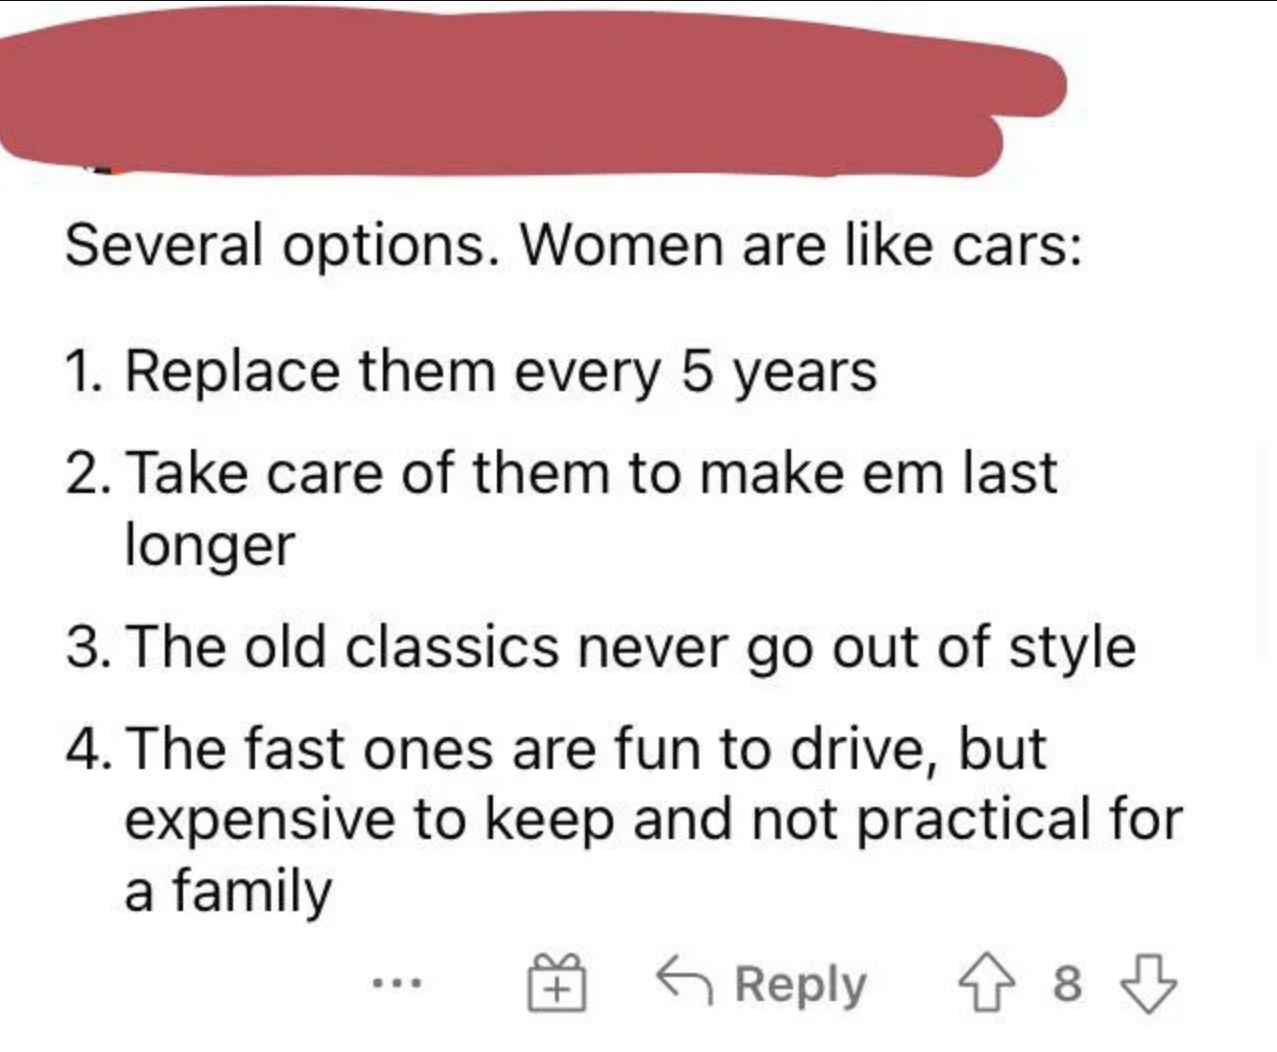 woman are like cars, replace them every 5 years, take care of them to make them last longer, the fast ones are fun to drive but expensive and not practical for a family